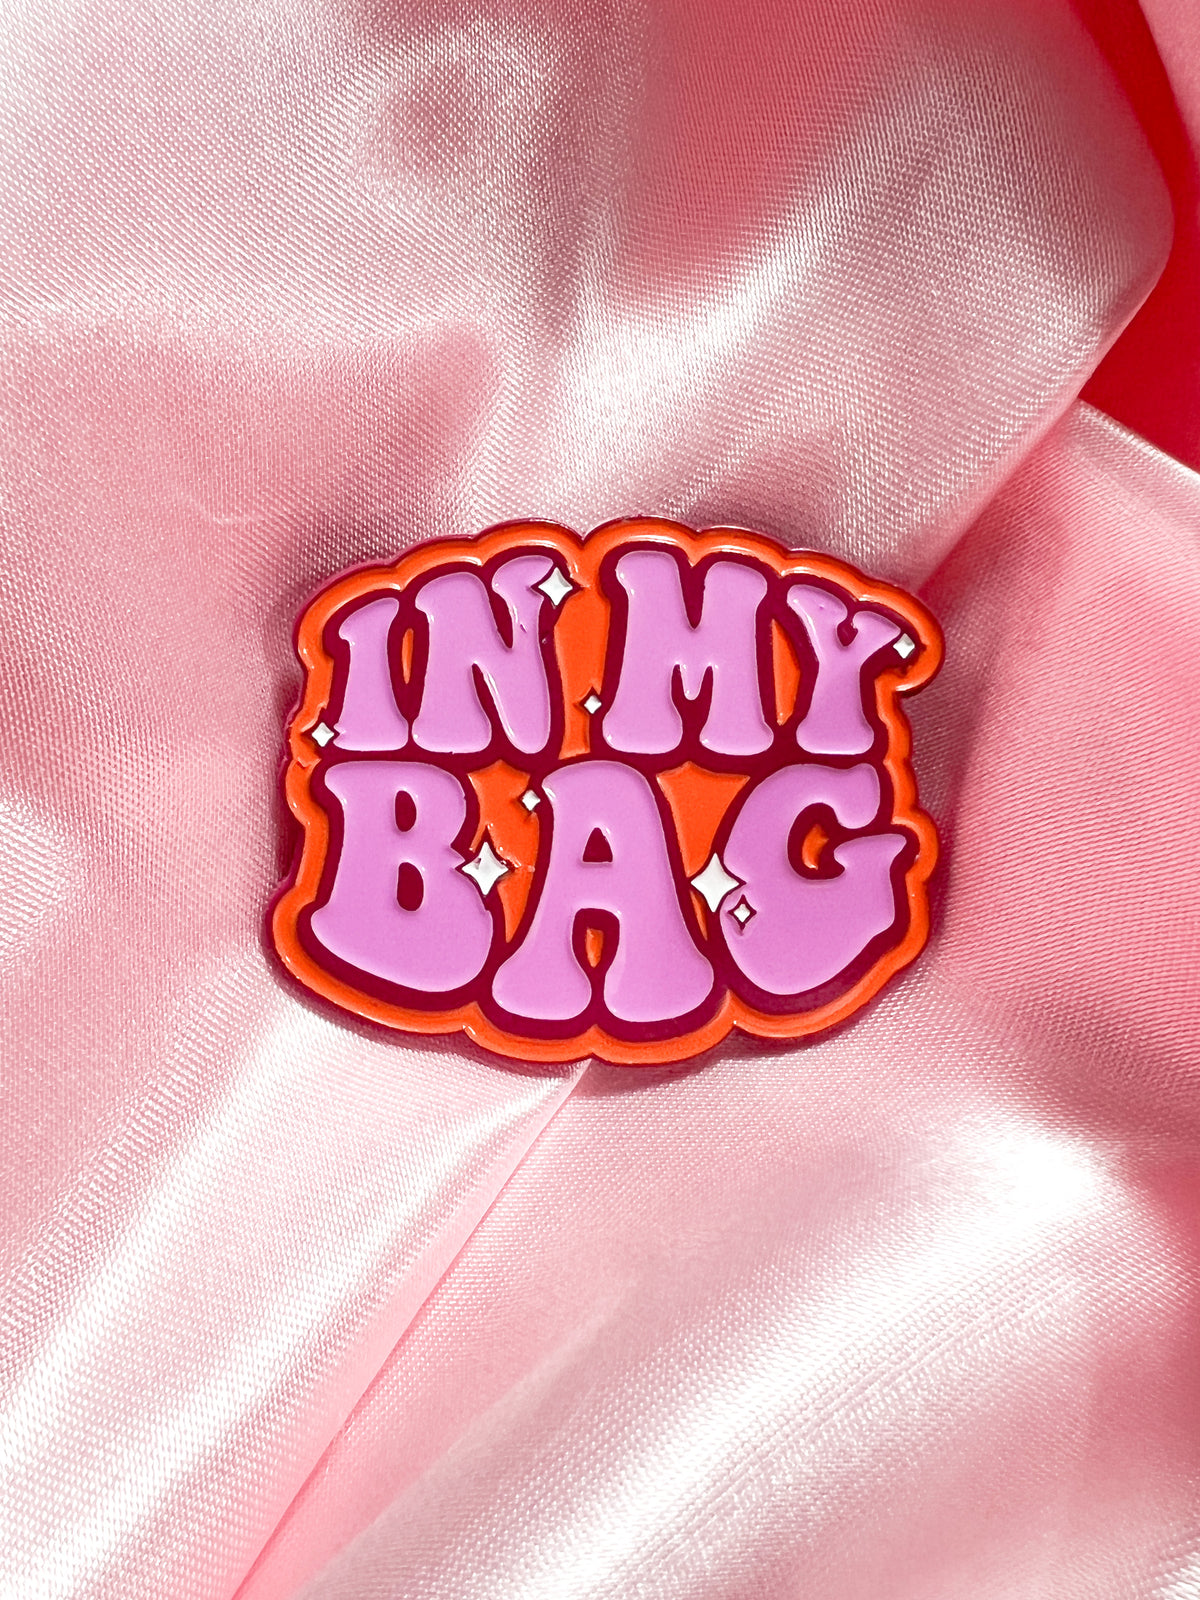 Pin on My bags